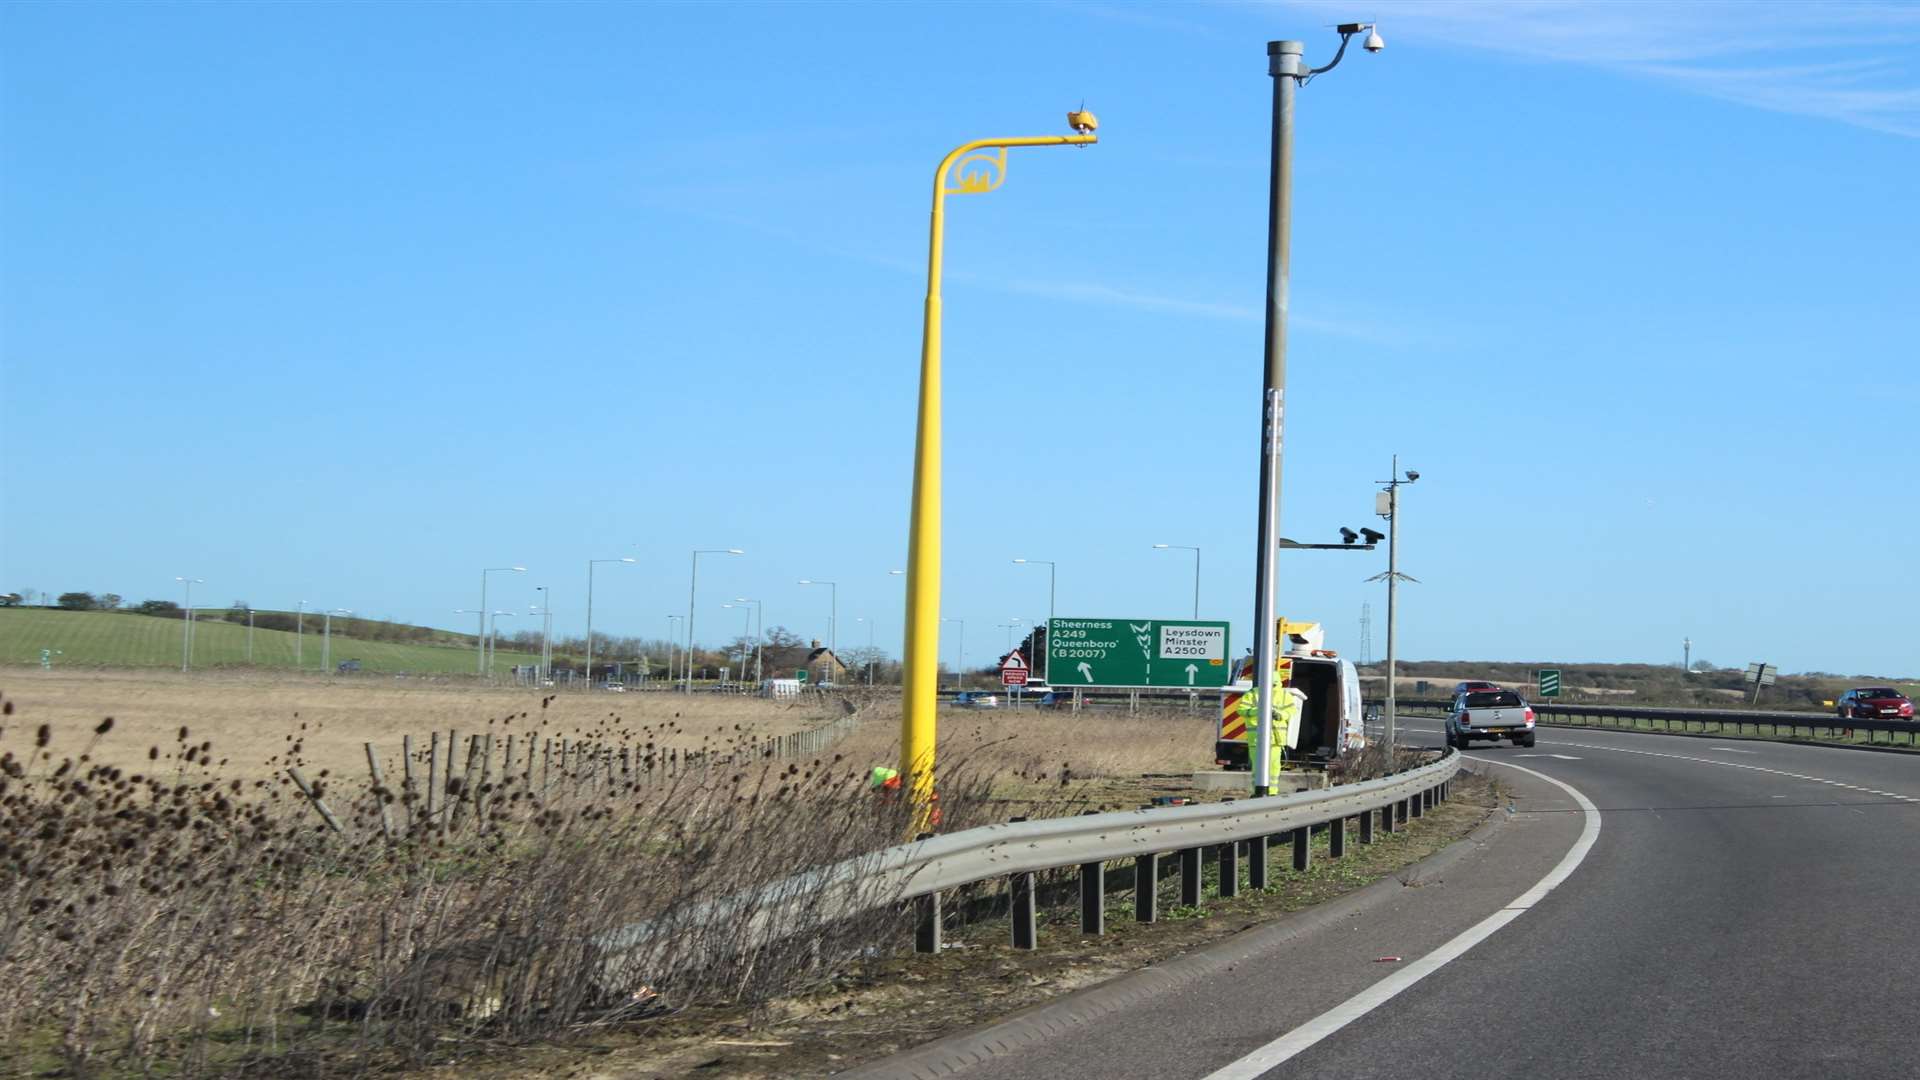 Average speed cameras on the A249 Sheppey Crossing